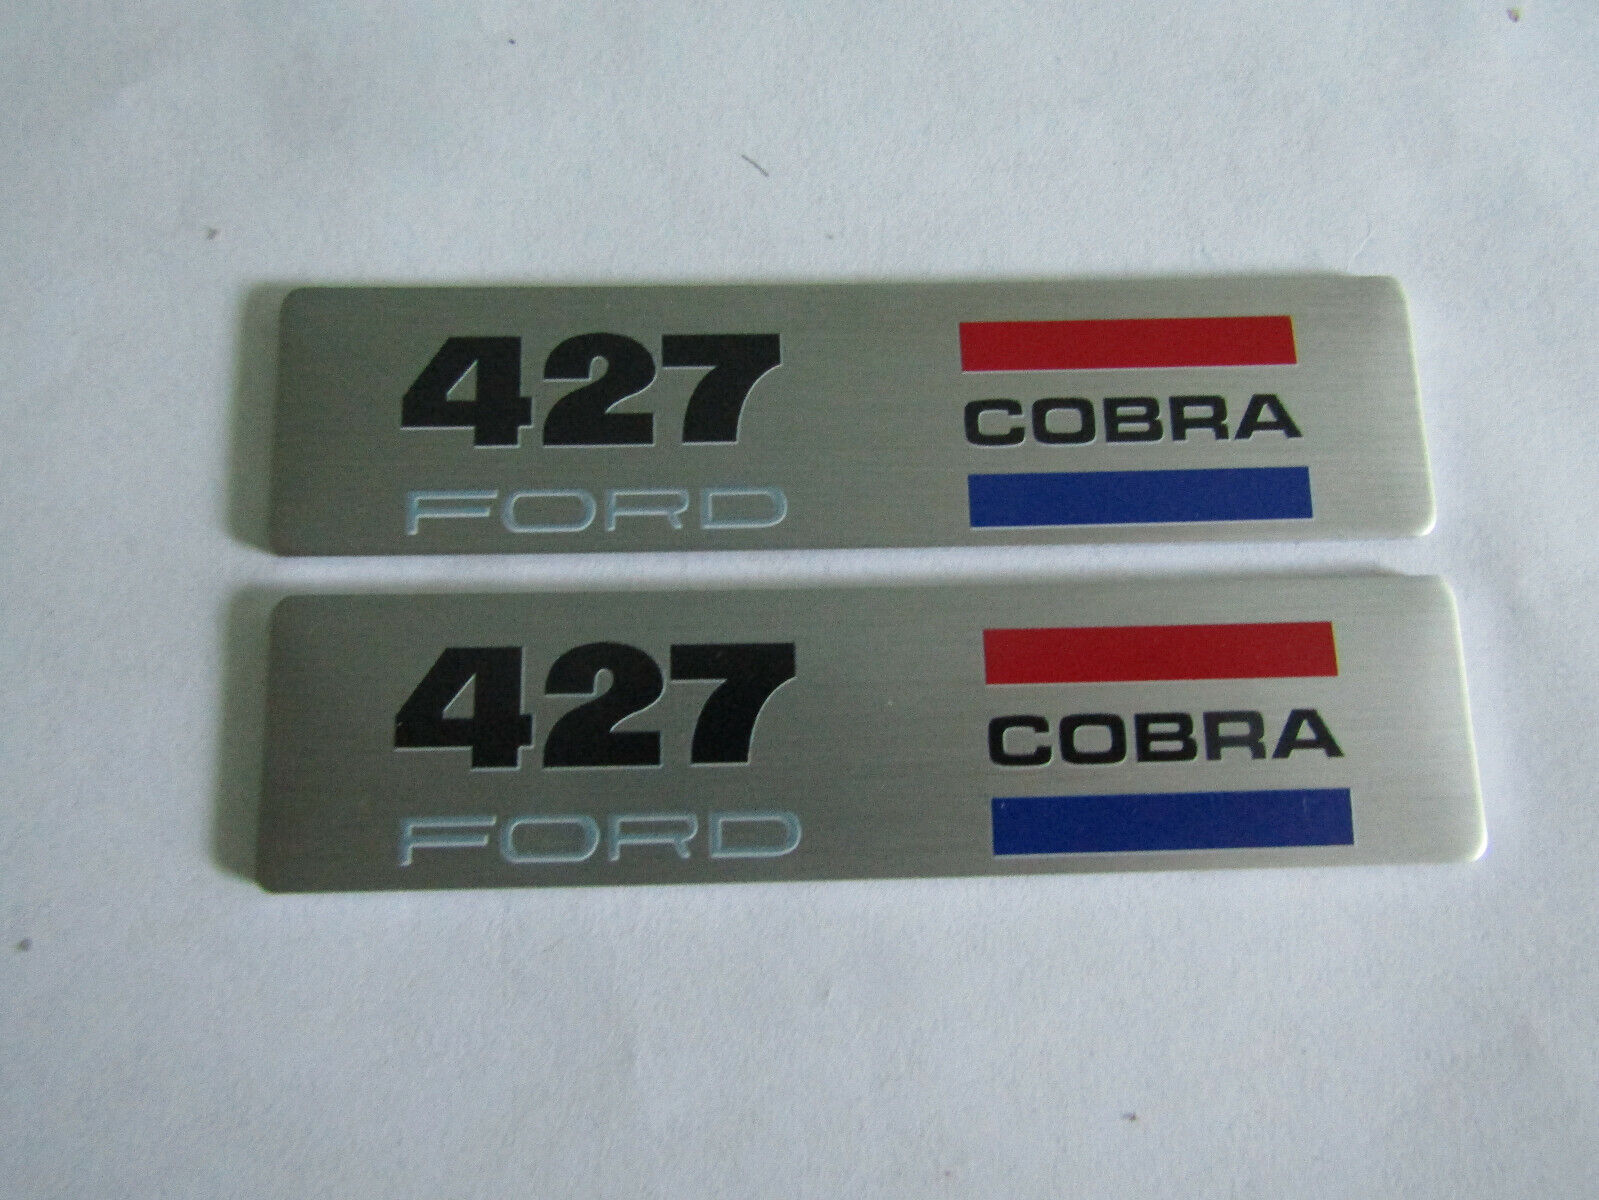 COBRA MUSTANG GALAXIE SHELBY 427 EQUIPPED SNAKE LOGO VINTAGE PLAQUES EMBLEMS 2X